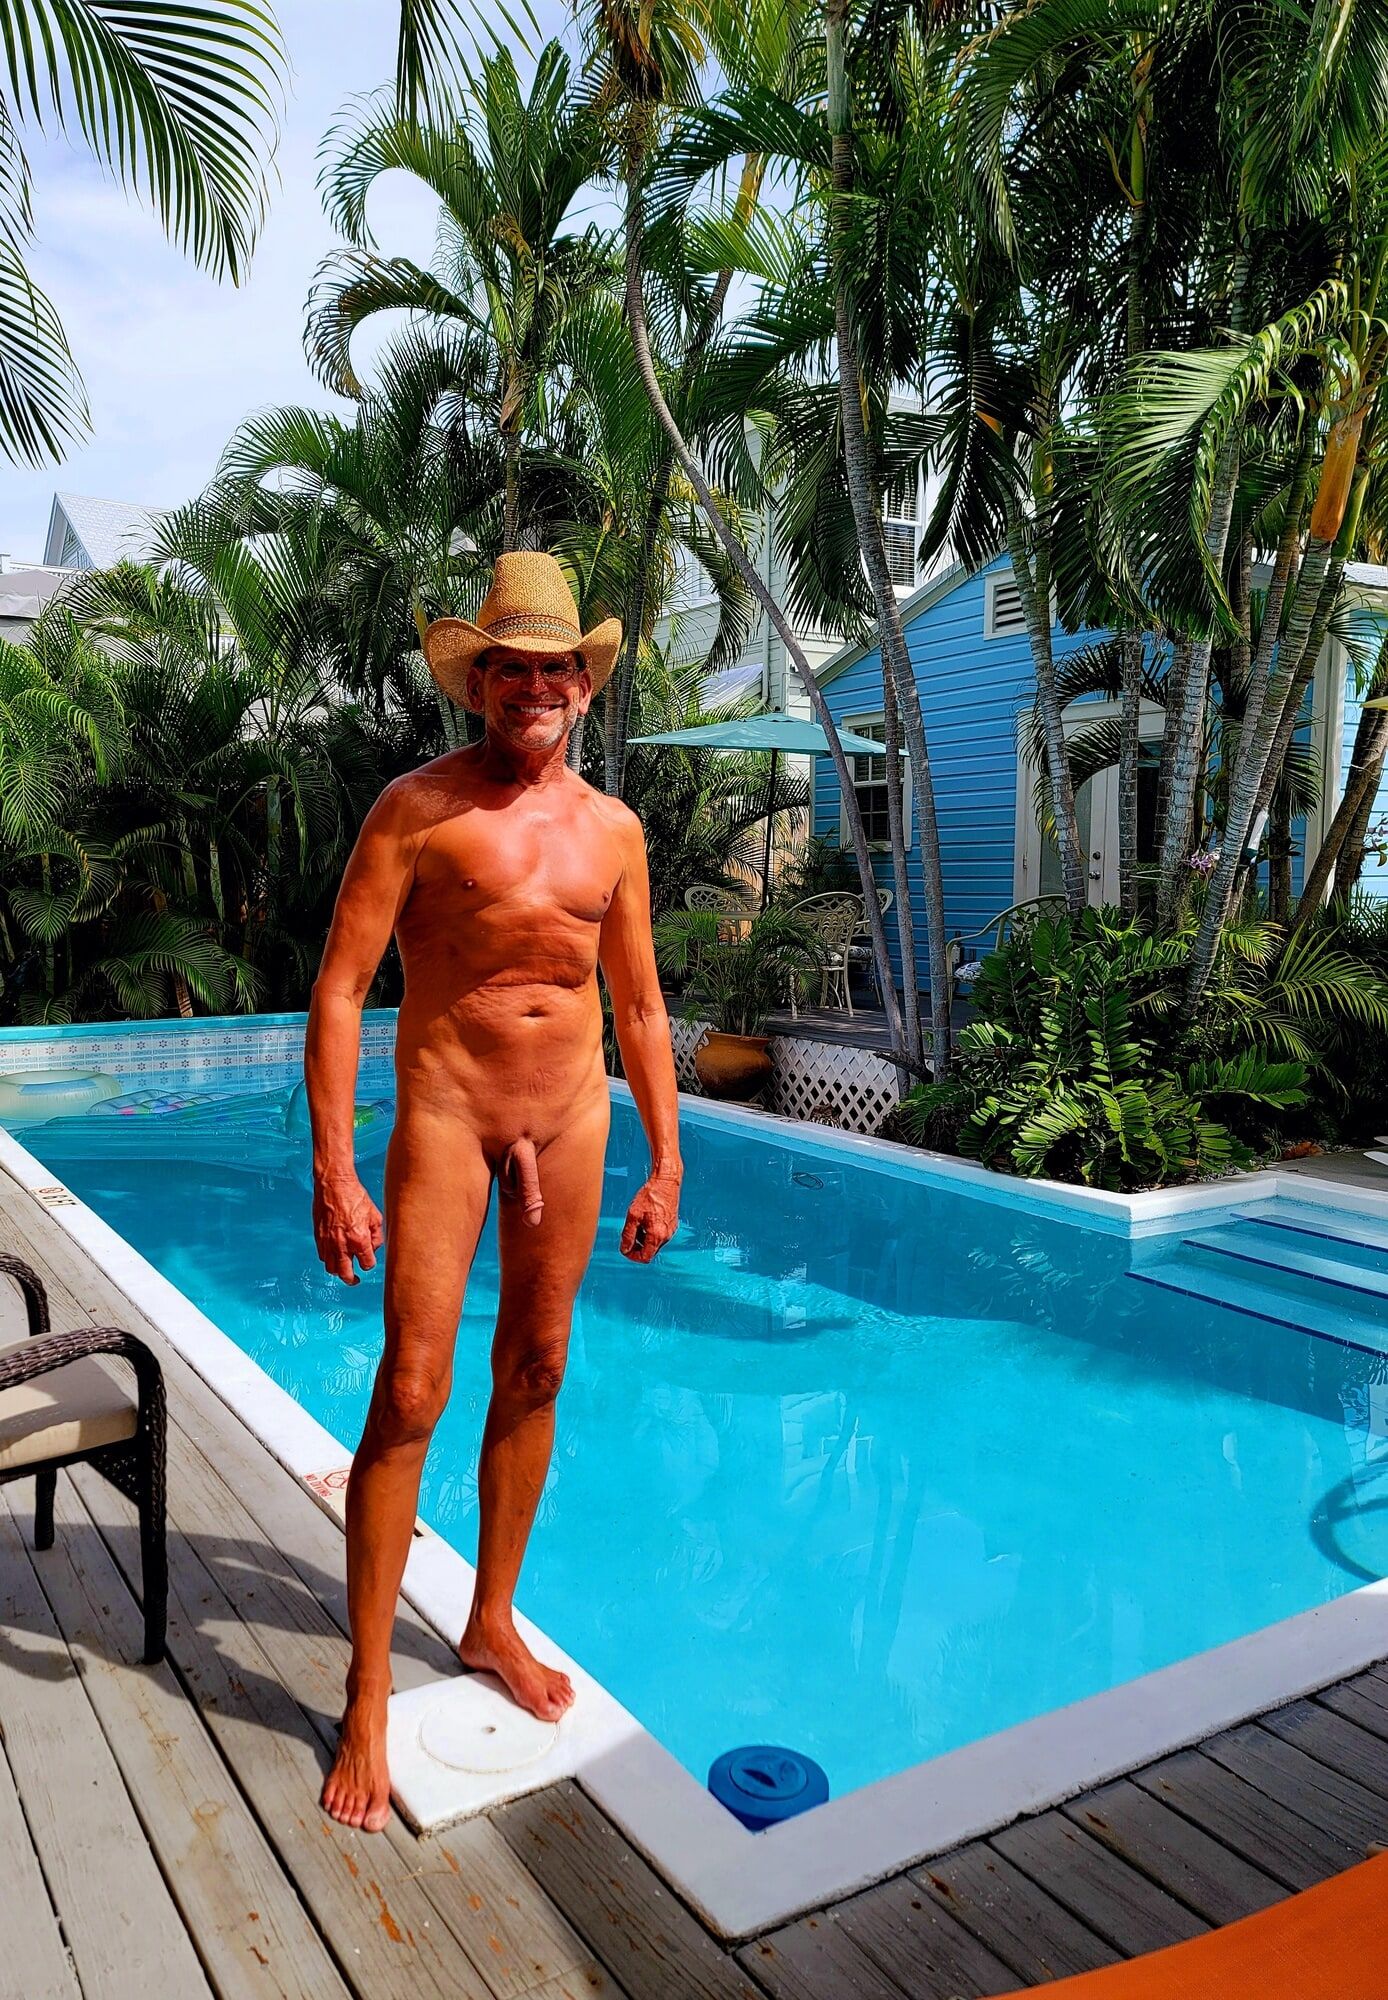 Naked Cowboy in Public at the Pool in Key West